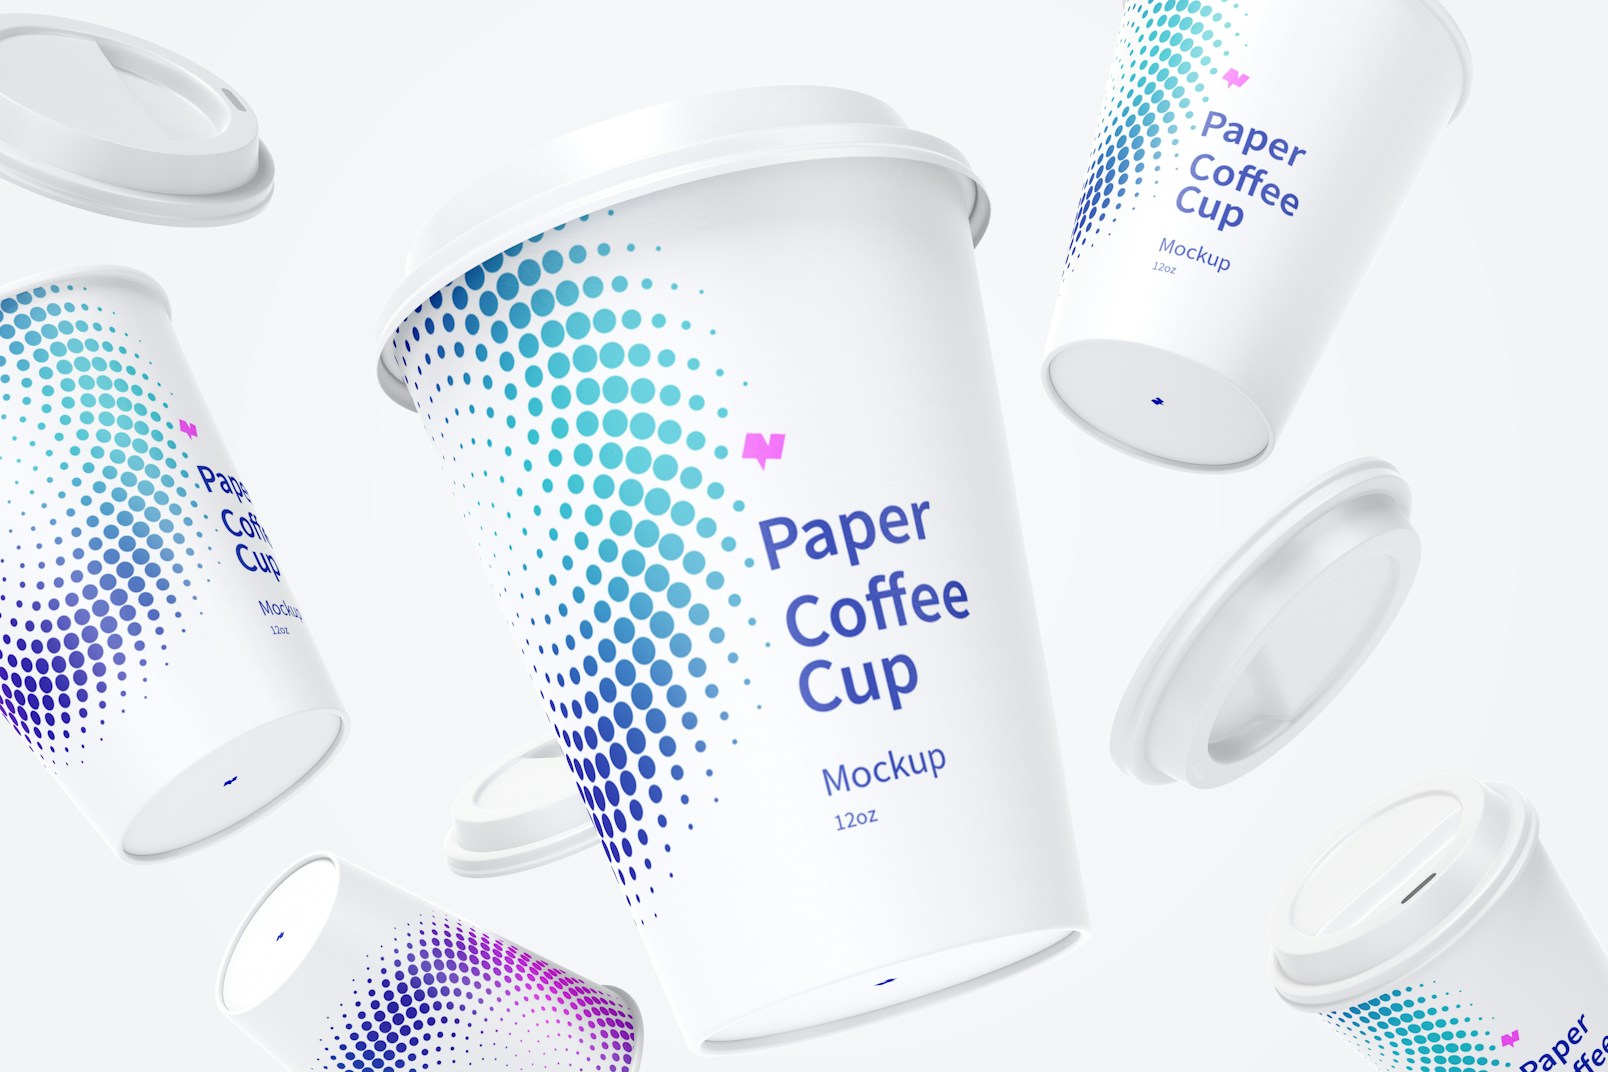 12oz Paper Coffee Cups with Caps Mockup, Falling